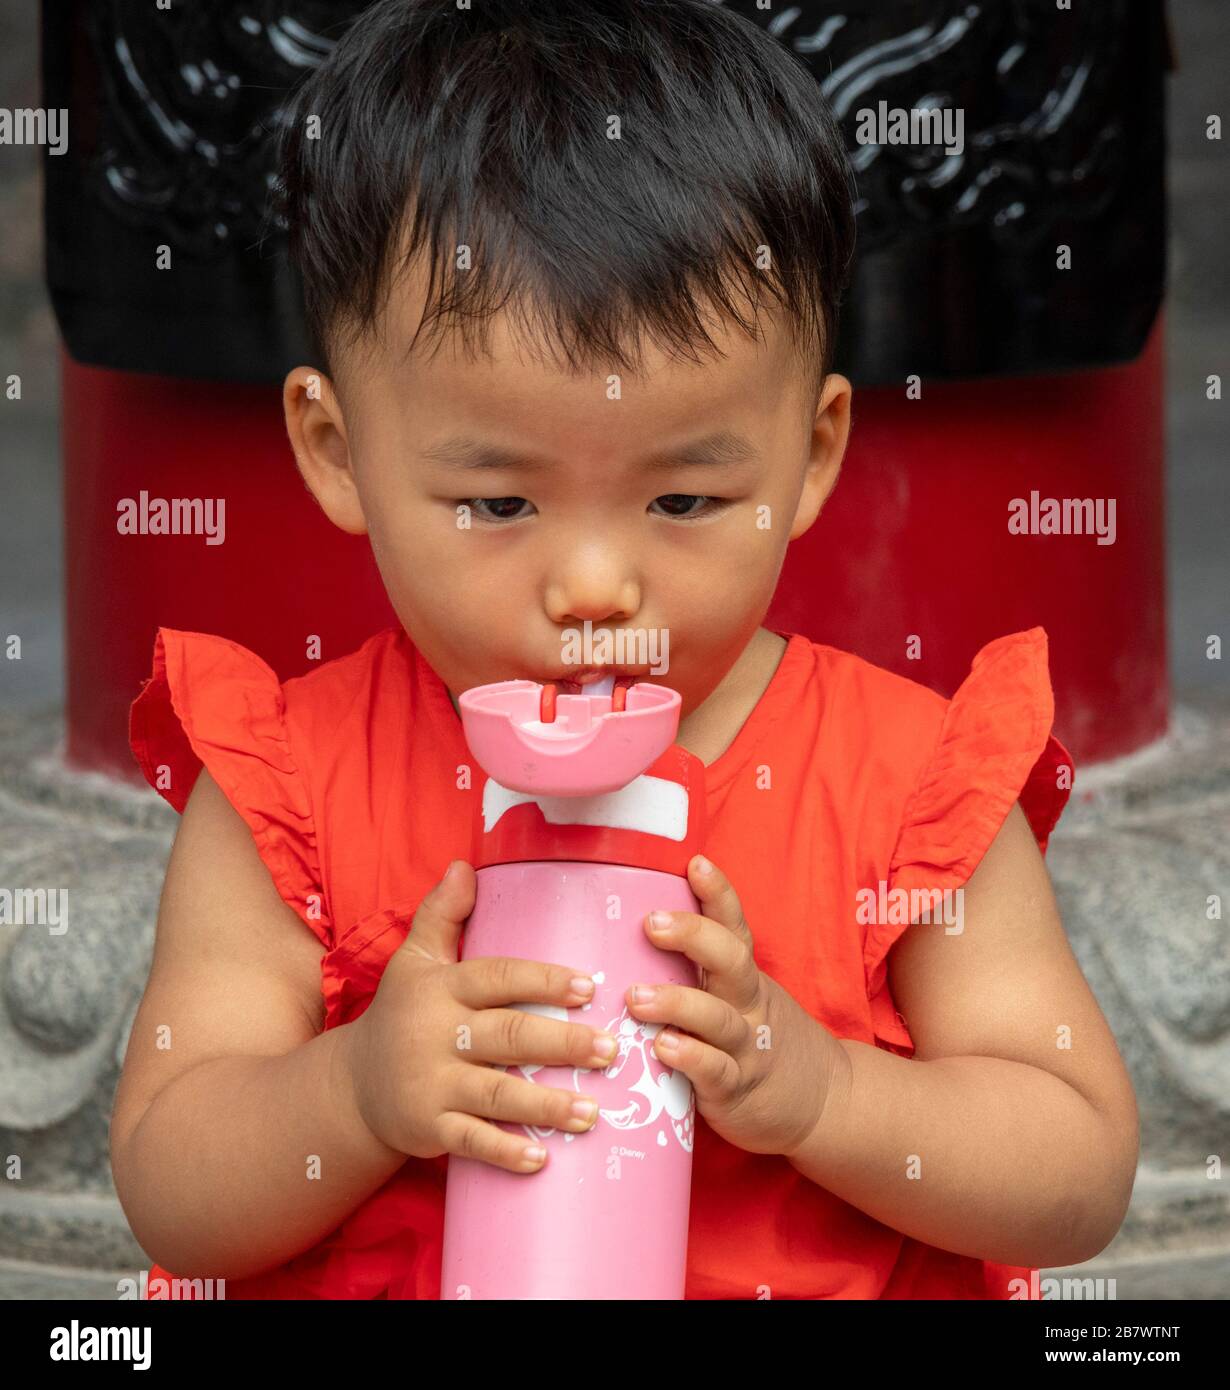 https://c8.alamy.com/comp/2B7WTNT/toddler-drinking-from-travel-mug-or-sippy-cup-xian-china-2B7WTNT.jpg